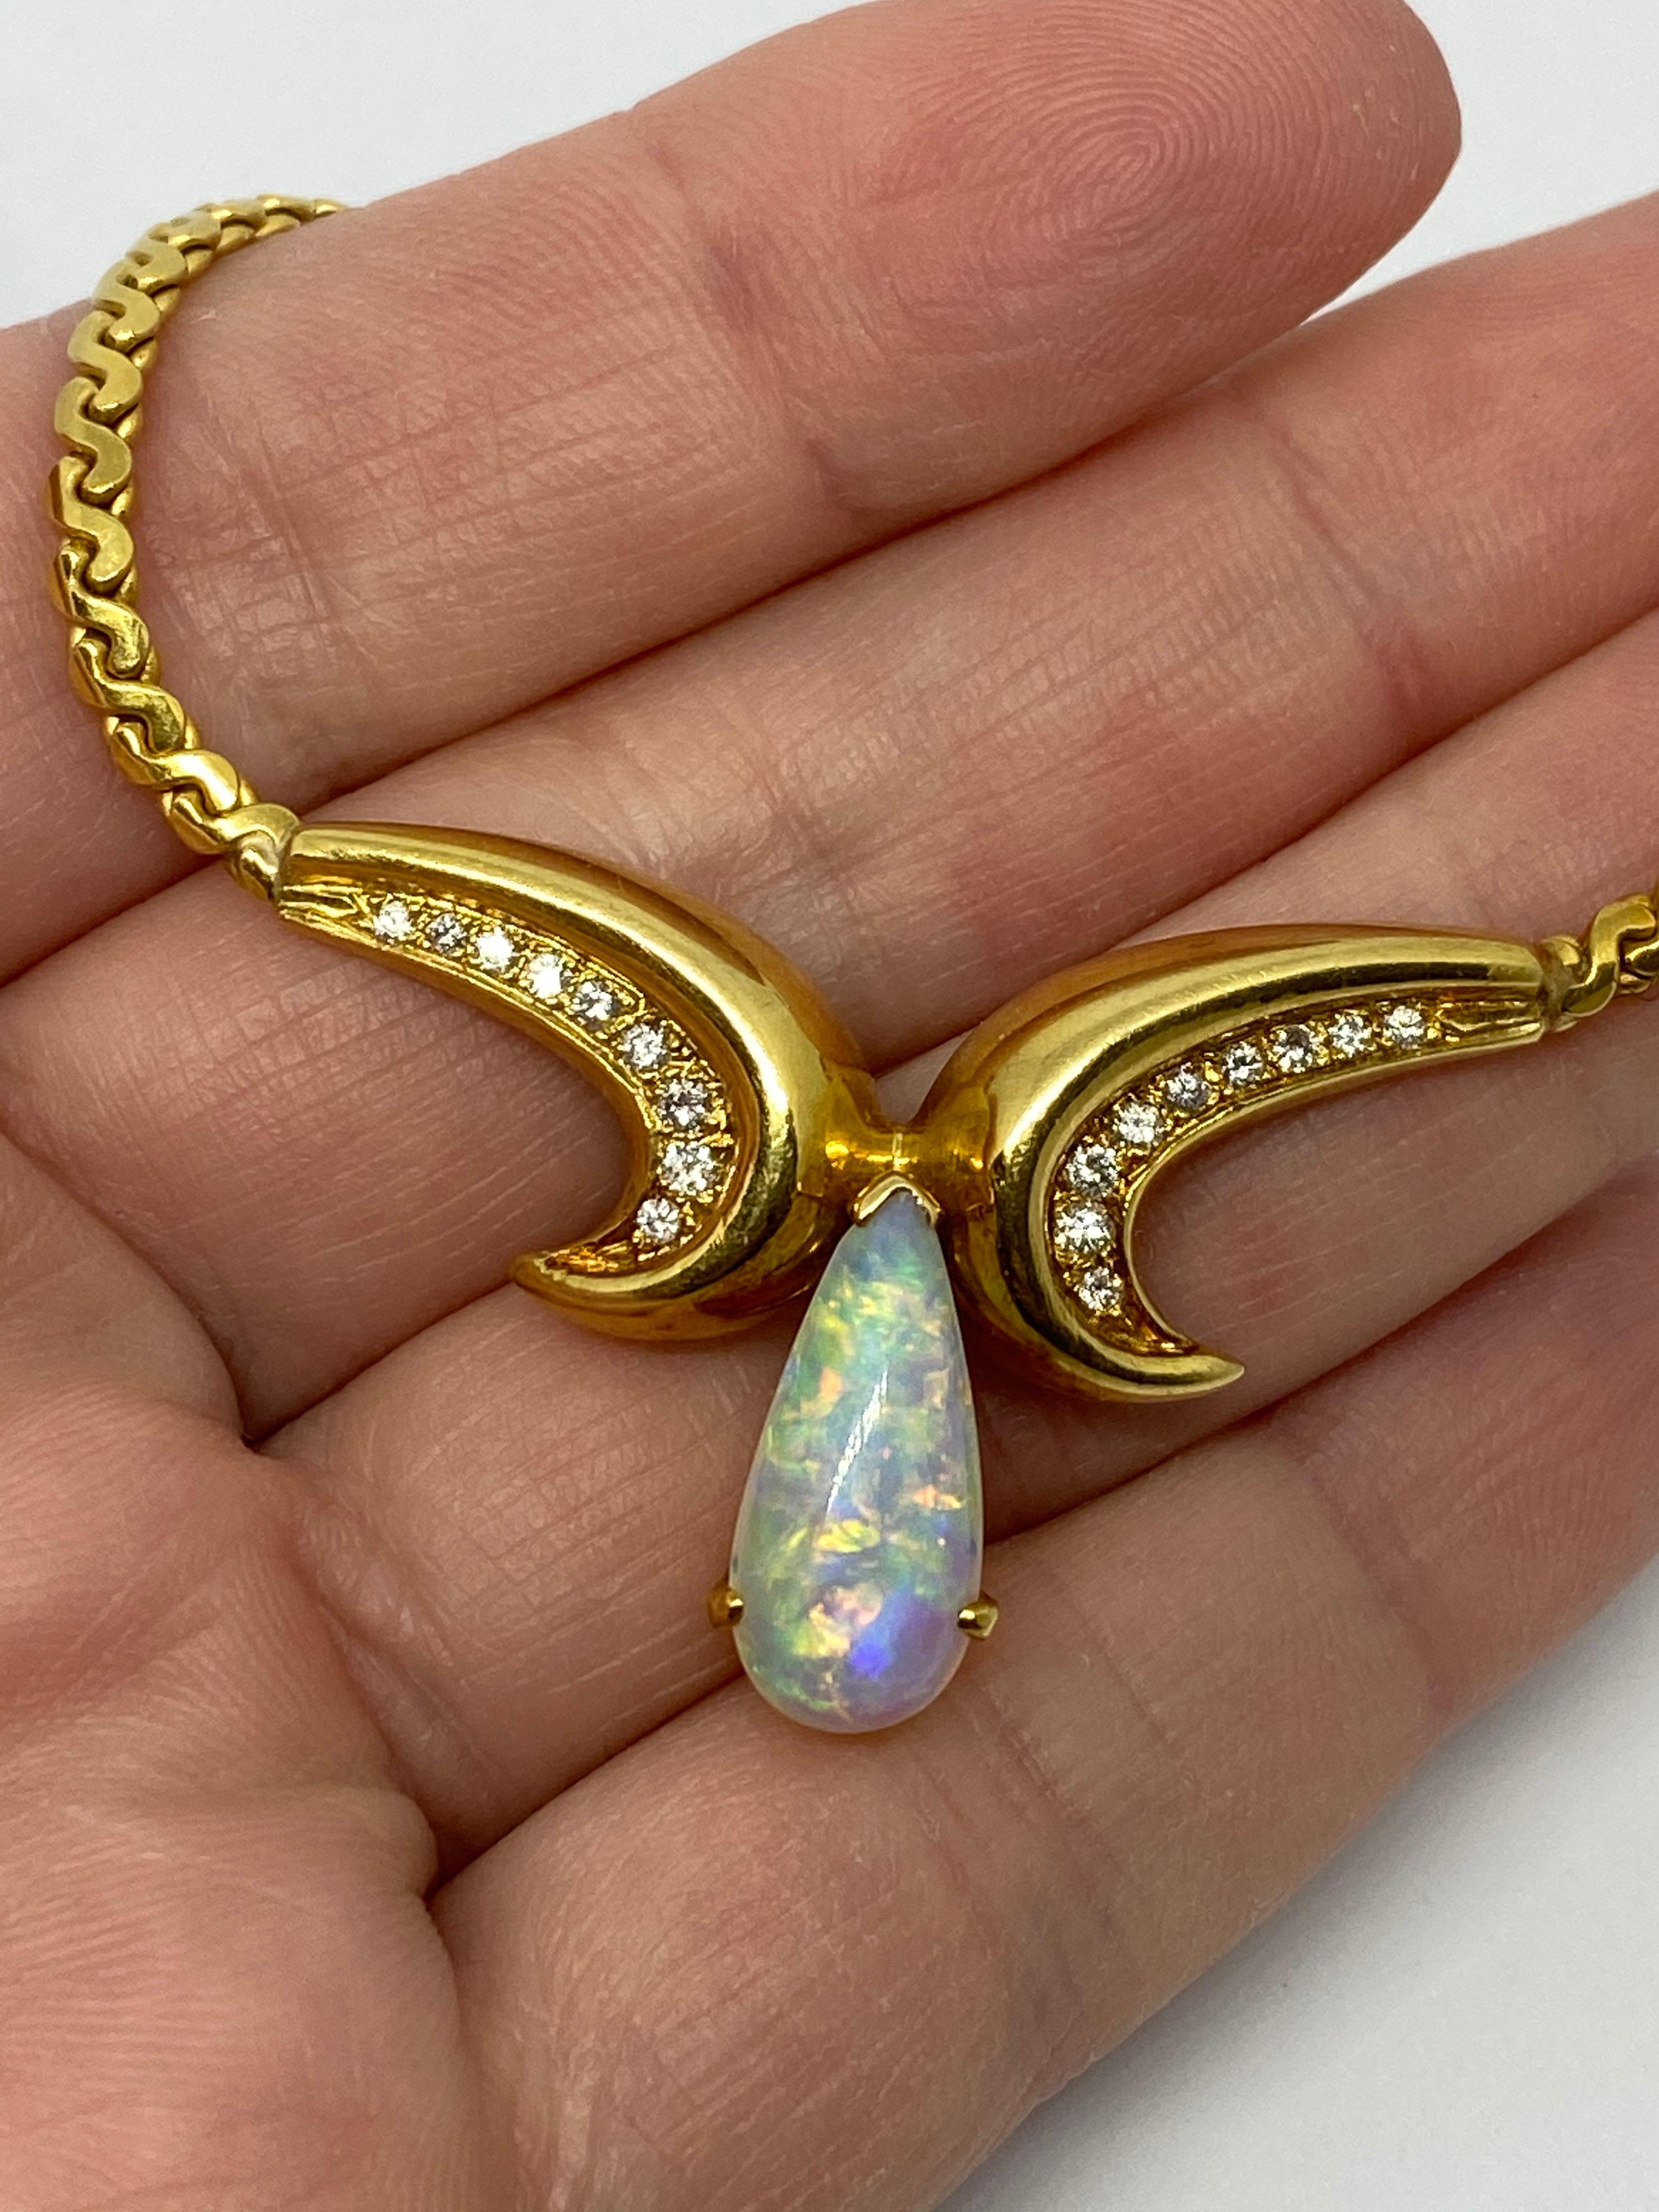 This is a preowned necklace in mint condition. The large pear-shaped opal measures 16 x 7mm and is approximately 2.50cts. The opal is clear in transparency with no matrix behind it and has lots of flashes of blue, green, yellow, red, and orange play